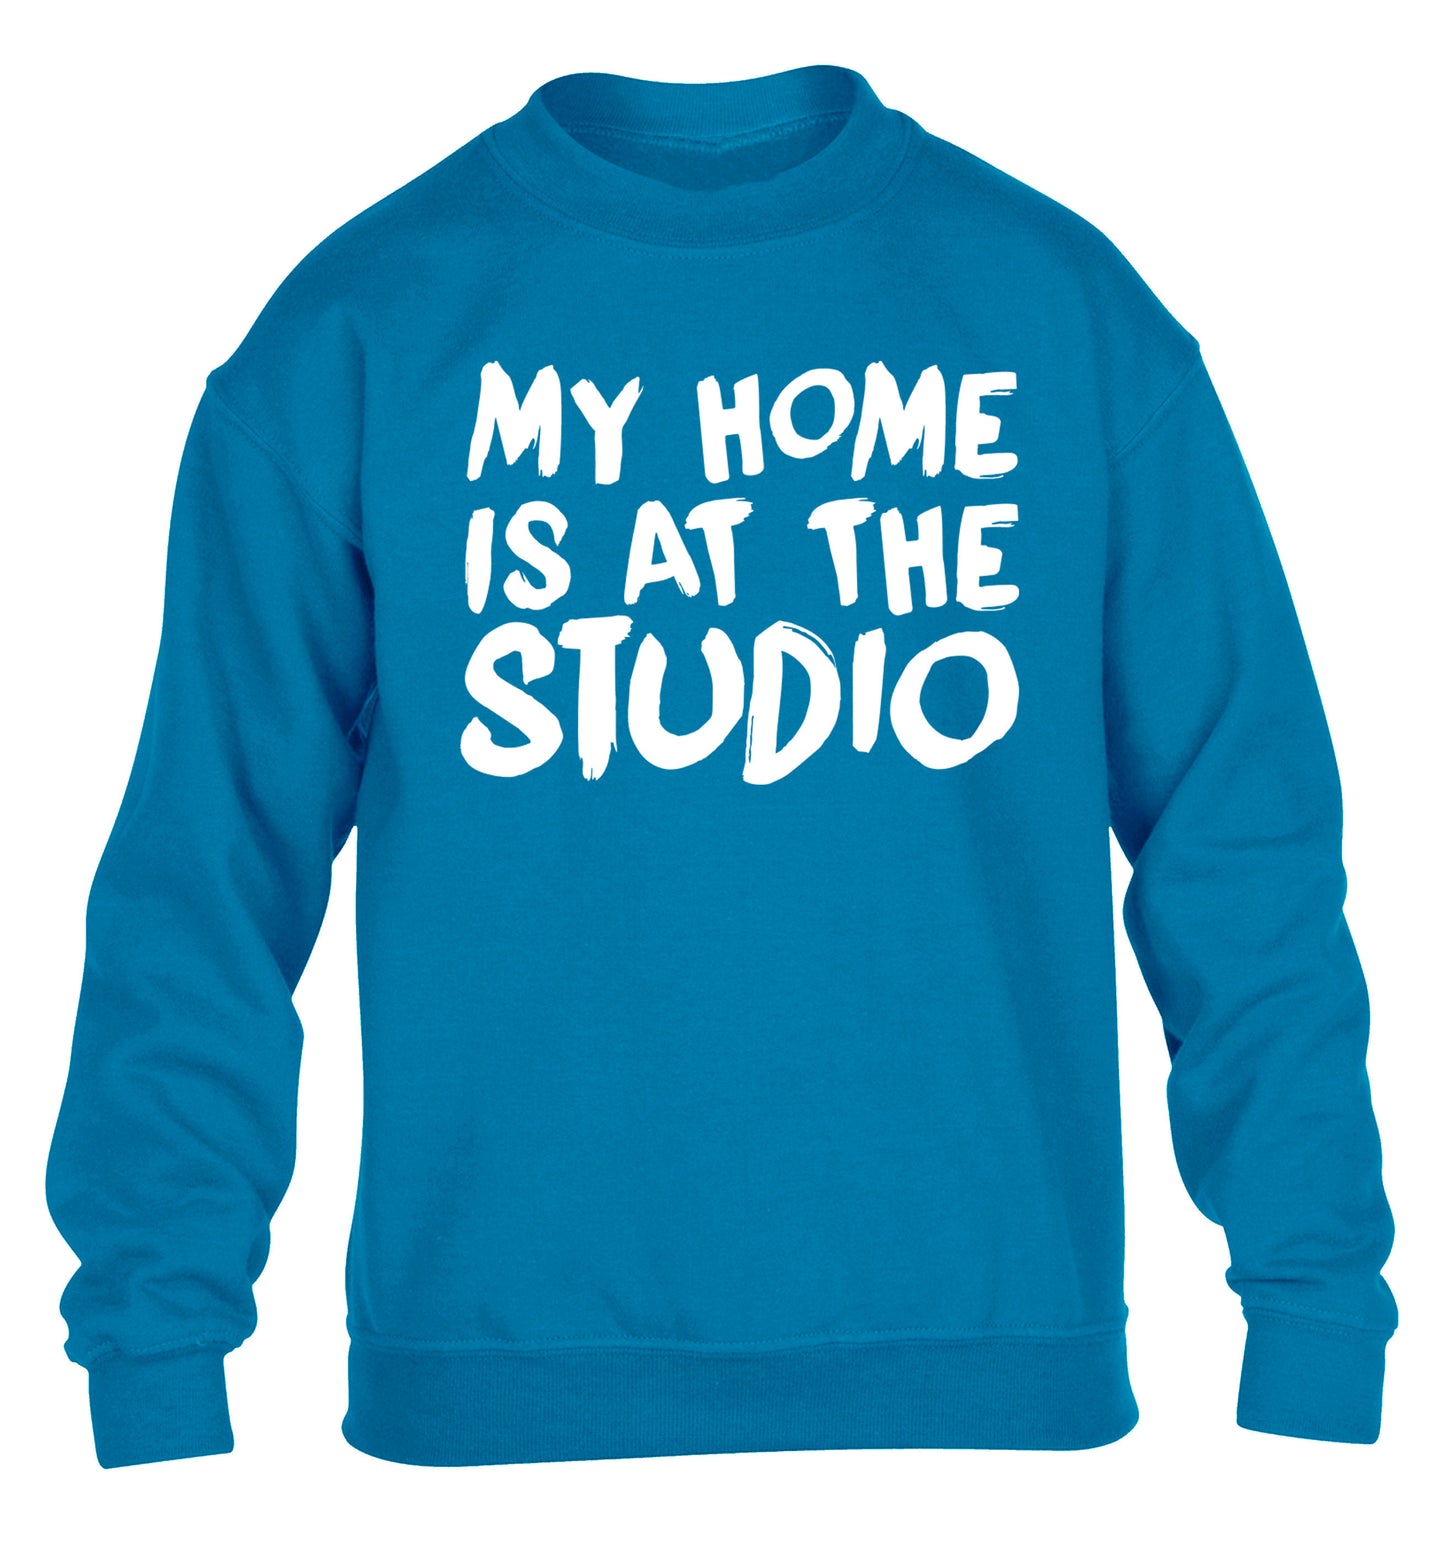 My home is at the studio children's blue sweater 12-14 Years